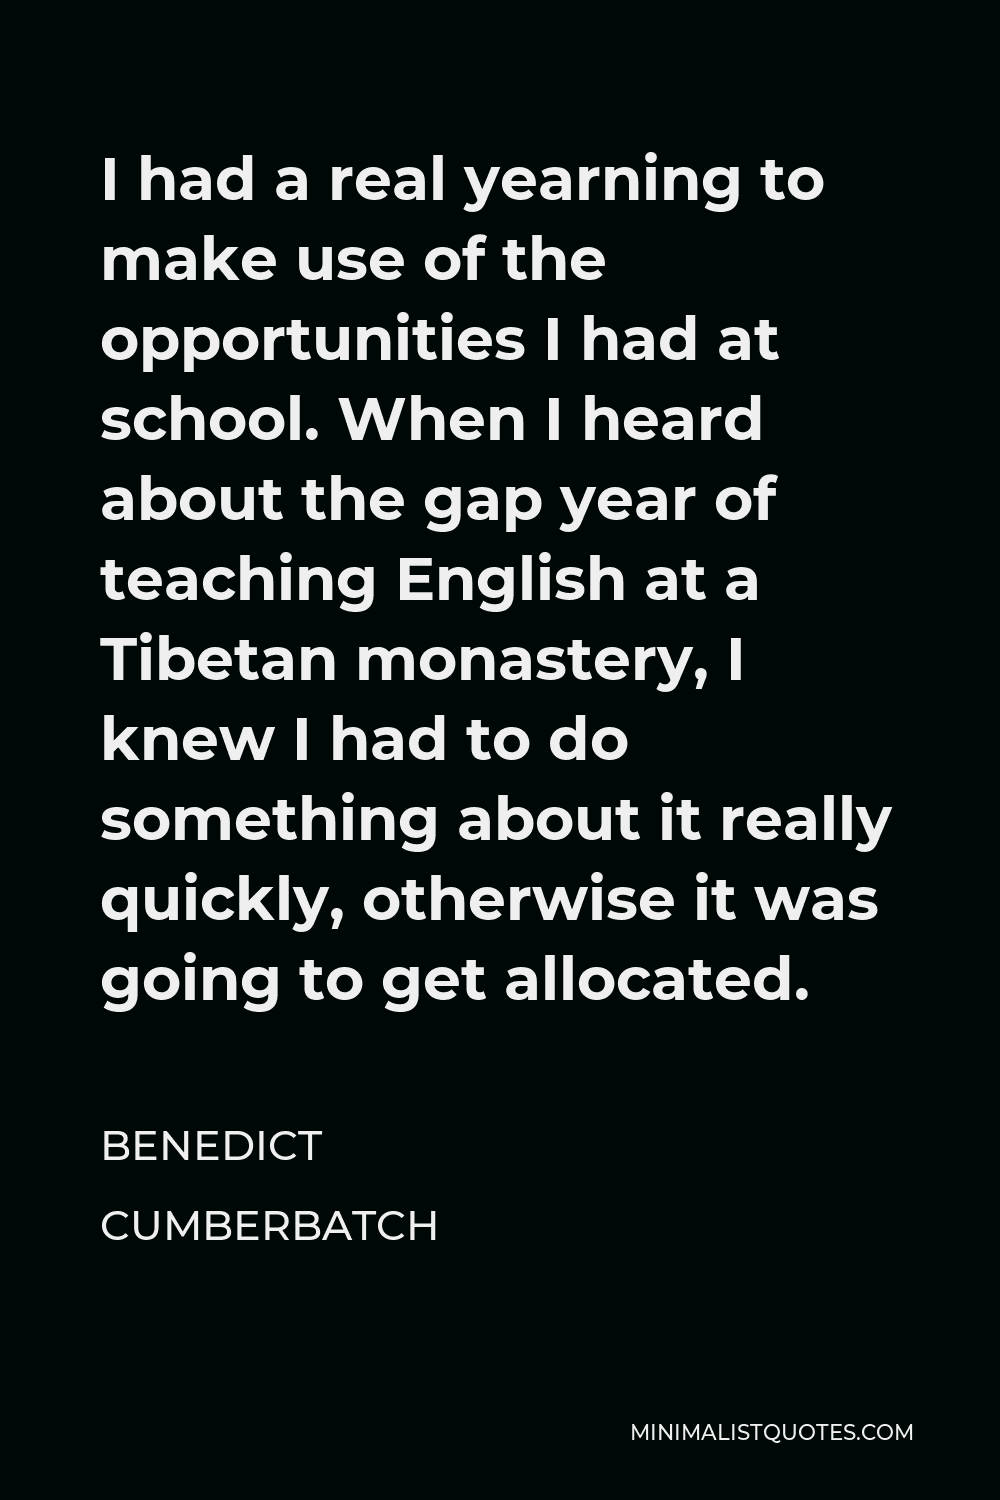 Benedict Cumberbatch Quote - I had a real yearning to make use of the opportunities I had at school. When I heard about the gap year of teaching English at a Tibetan monastery, I knew I had to do something about it really quickly, otherwise it was going to get allocated.